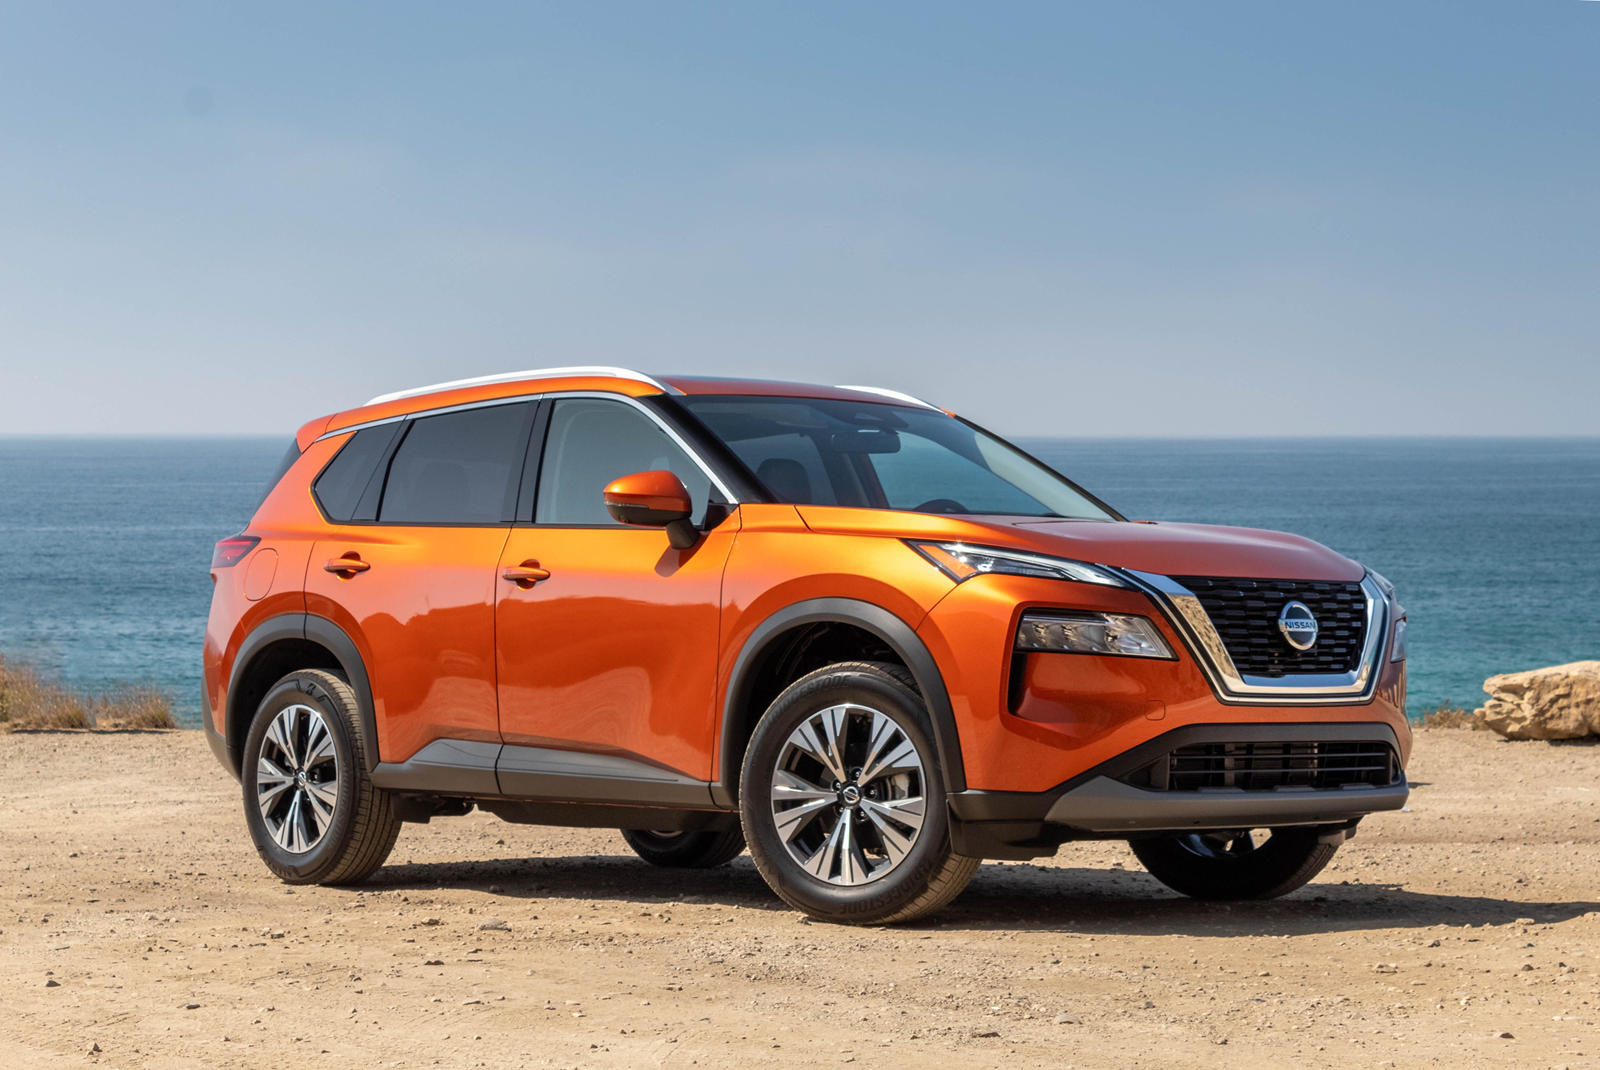 Nissan Rogue Vs. Mazda CX-5: The Compact Crossover Kings | CarBuzz